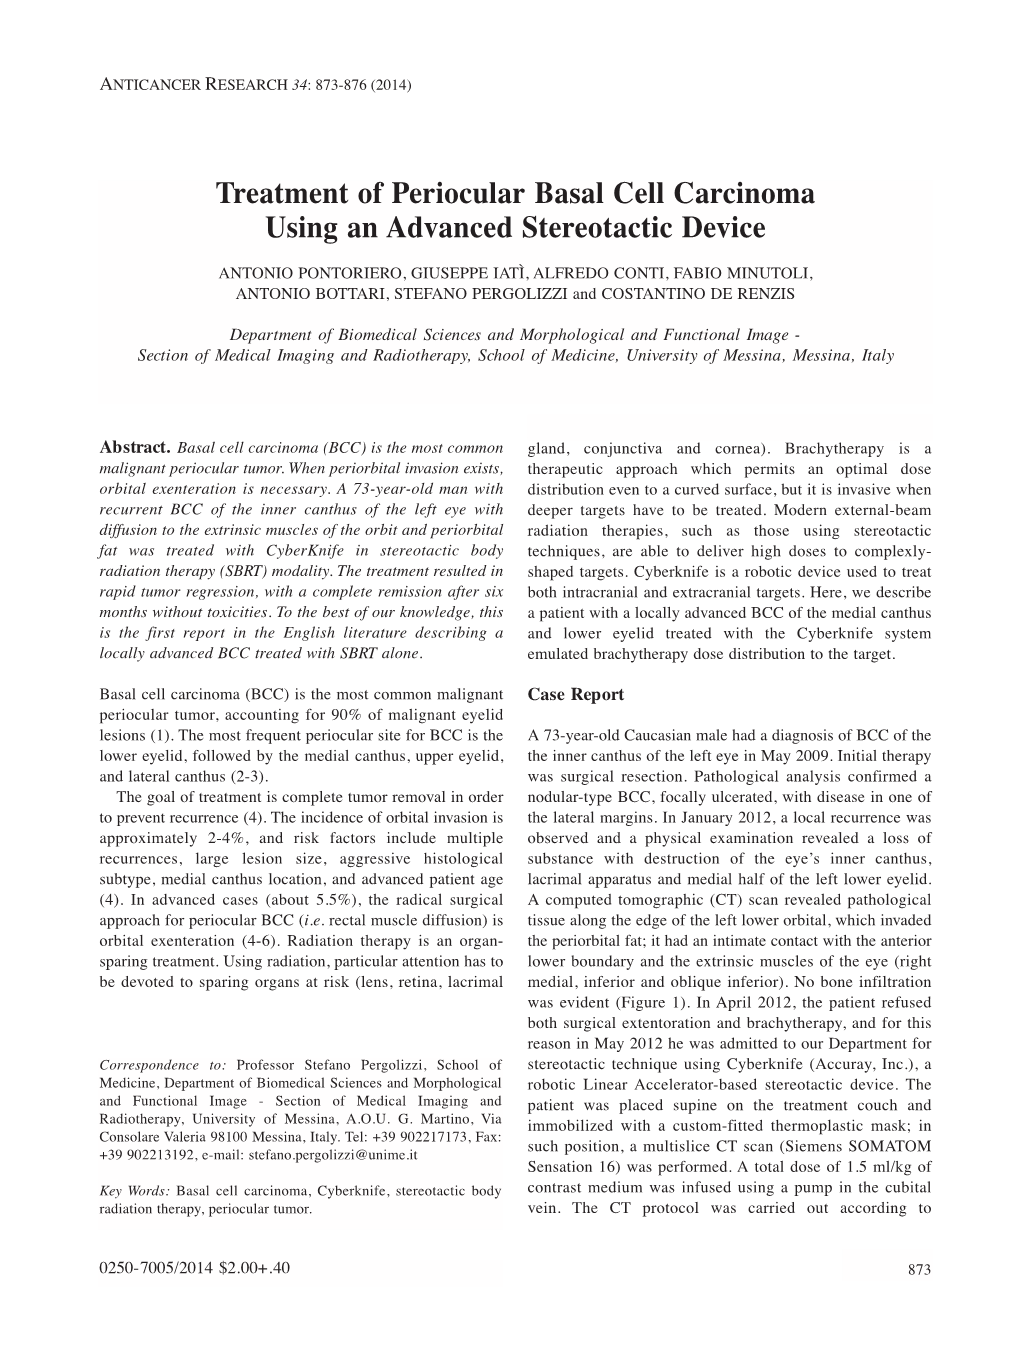 Treatment of Periocular Basal Cell Carcinoma Using an Advanced Stereotactic Device